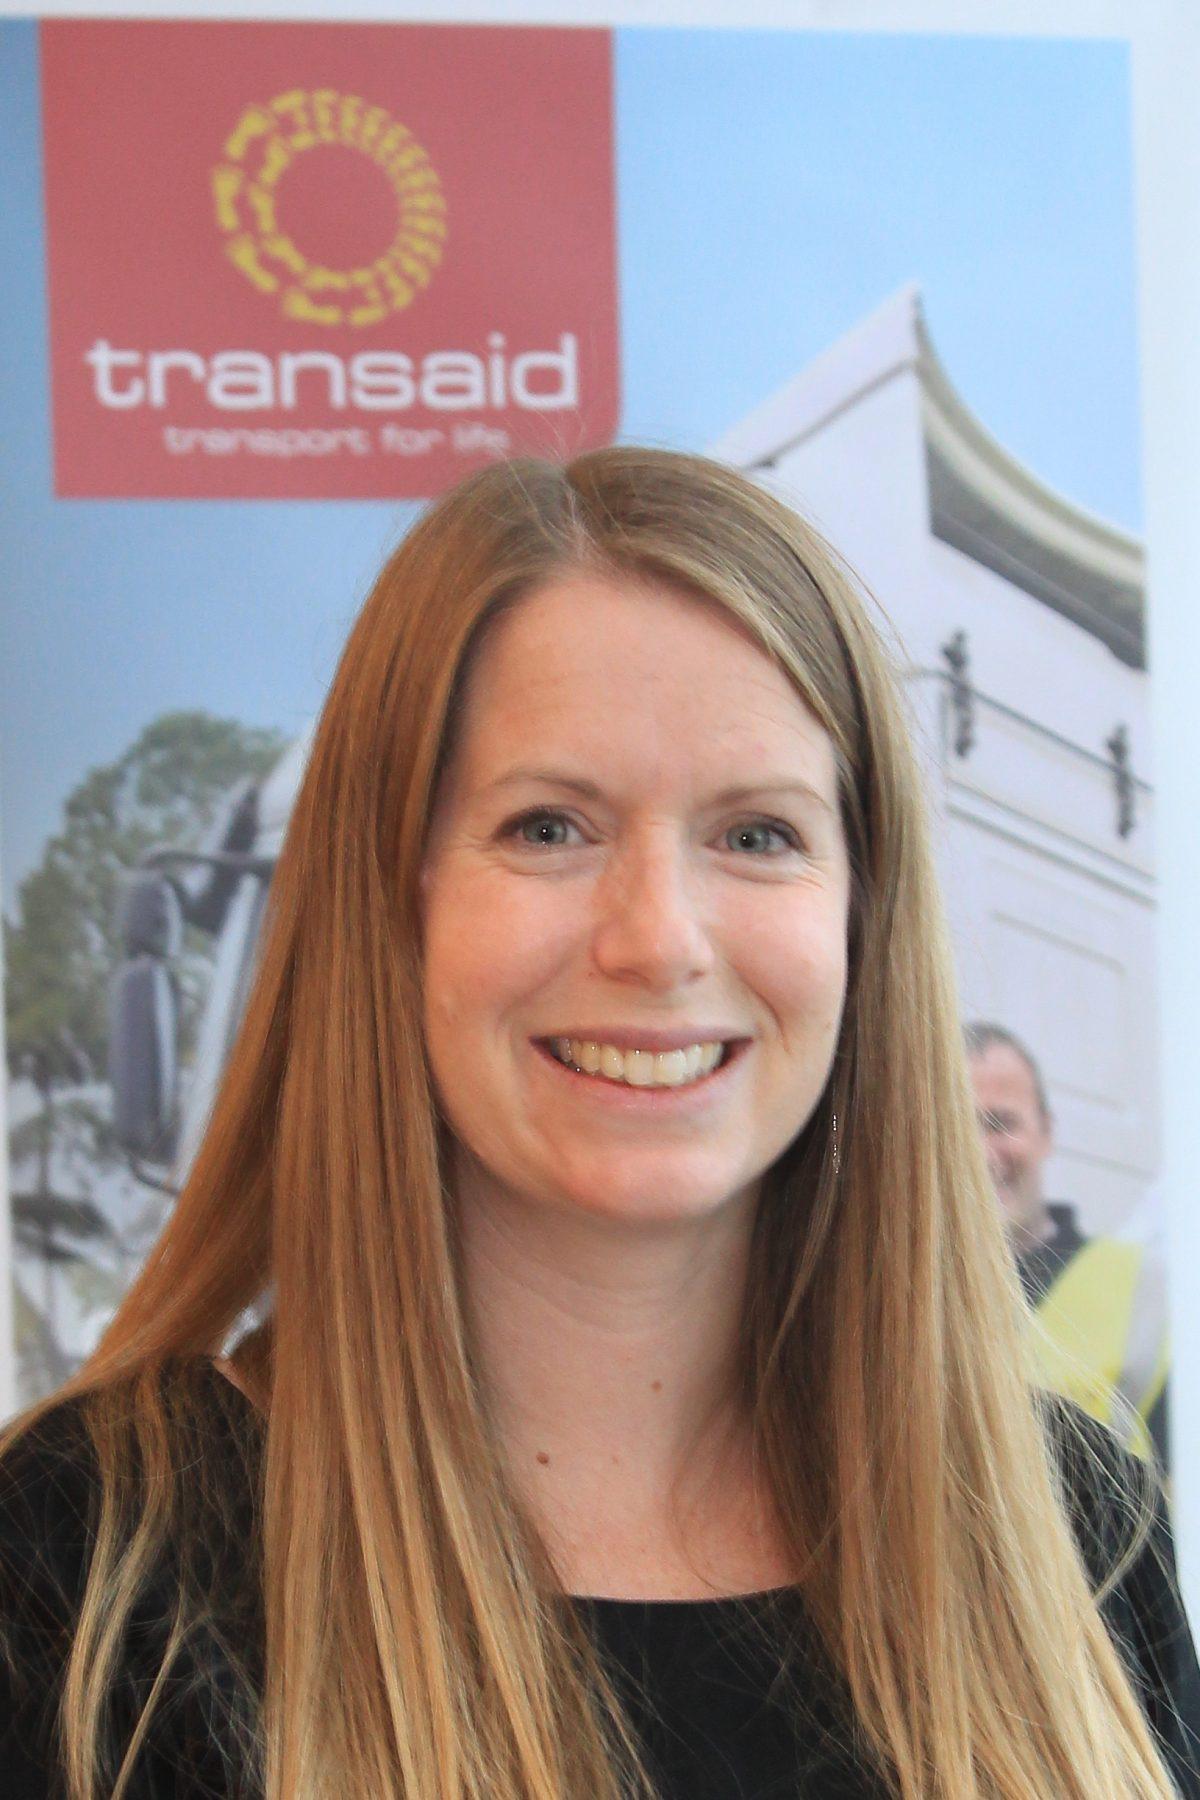 CAROLINE BARBER TO BE APPOINTED CHIEF EXECUTIVE OF TRANSAID